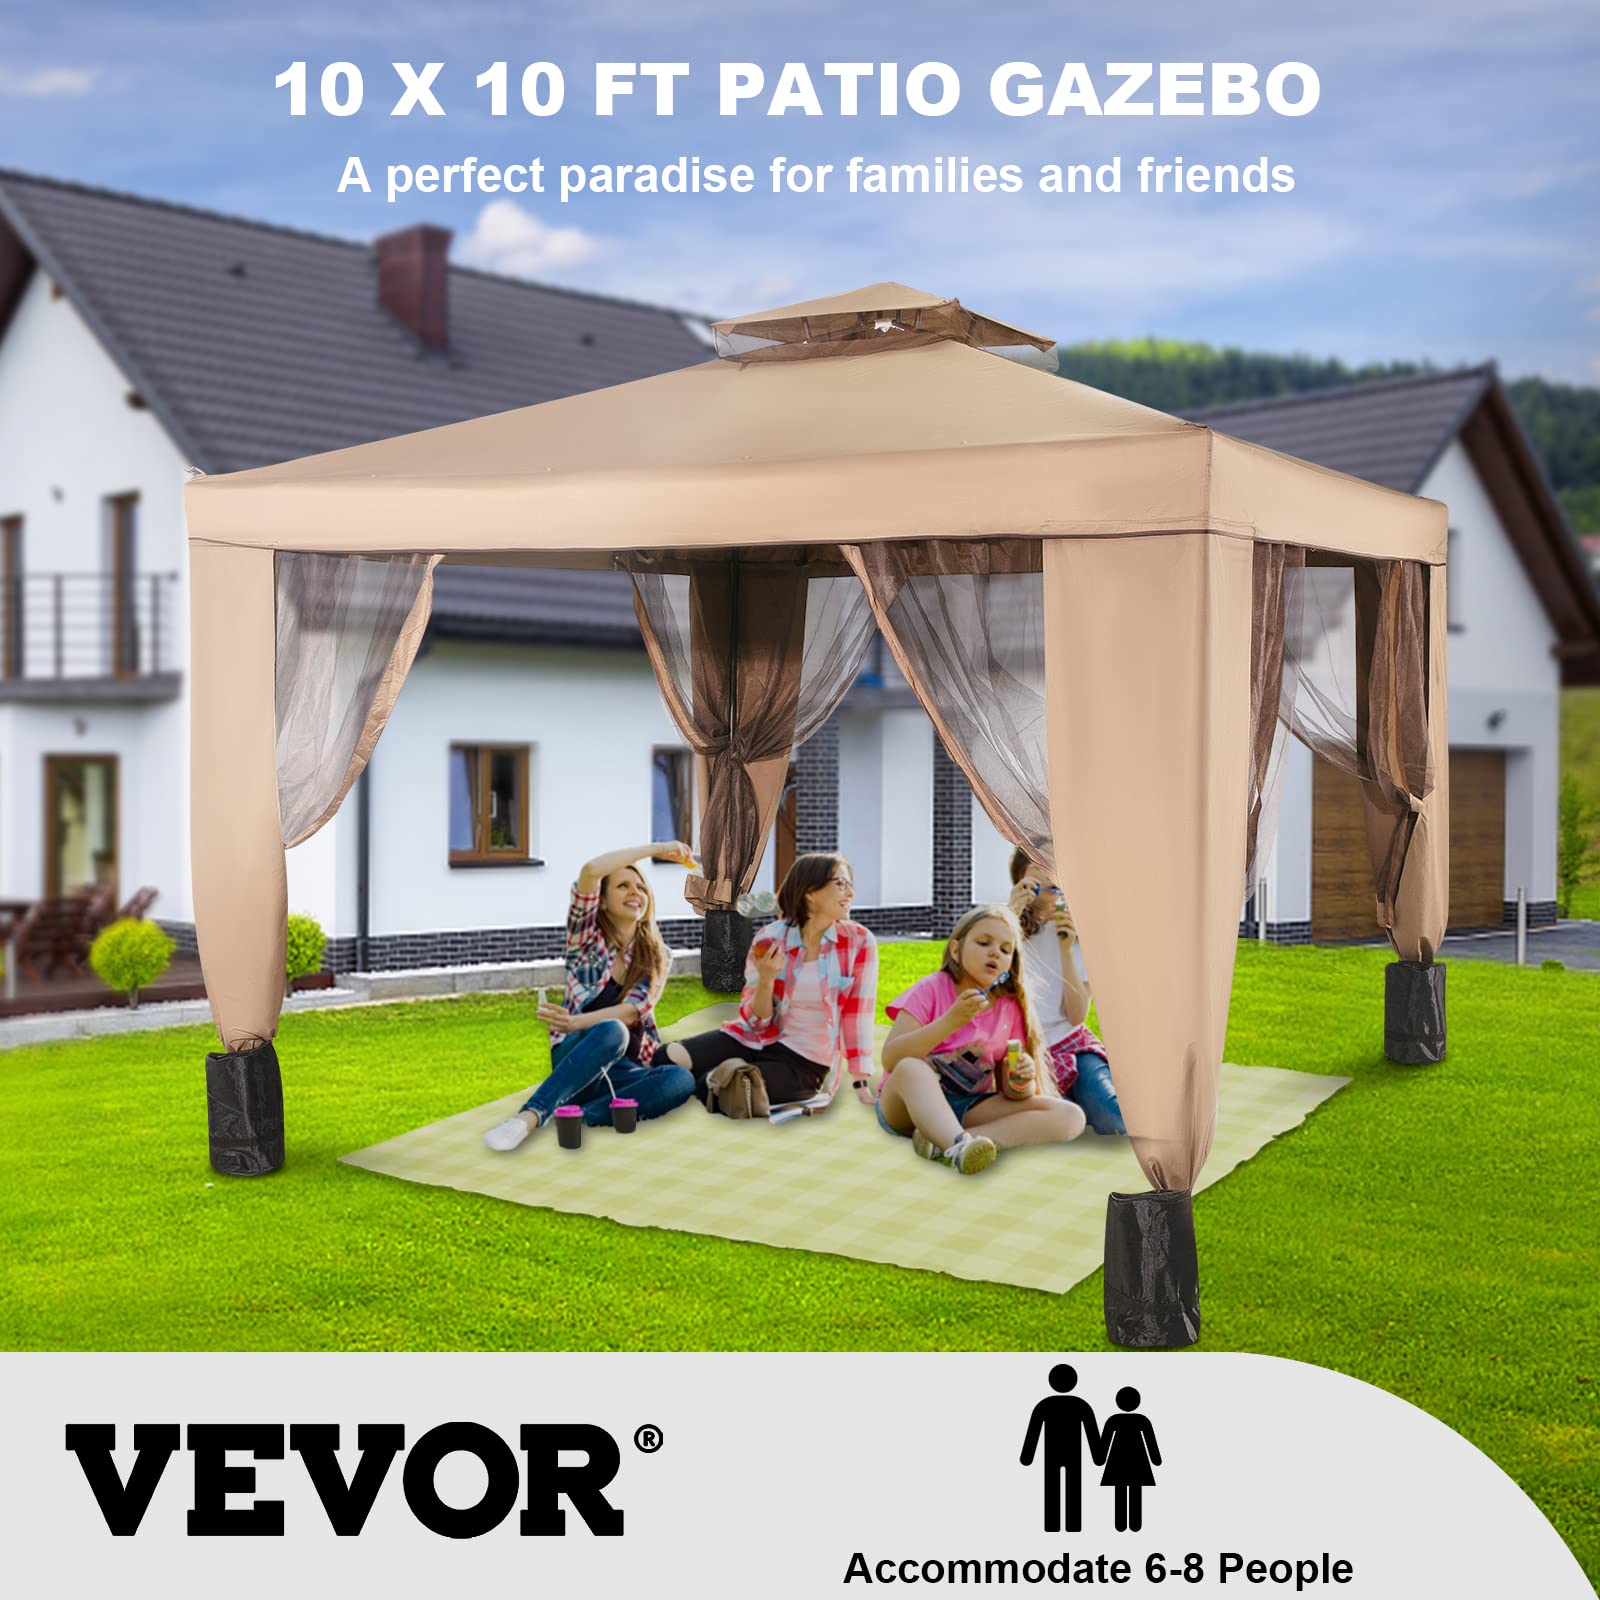 Happybuy Outdoor Canopy Gazebo Tent, Portable Canopy Shelter with 10'x10' Large Shade Space for Party, Backyard, Patio Lawn and Garden, 4 Sandbags, and Netting Included, Brown